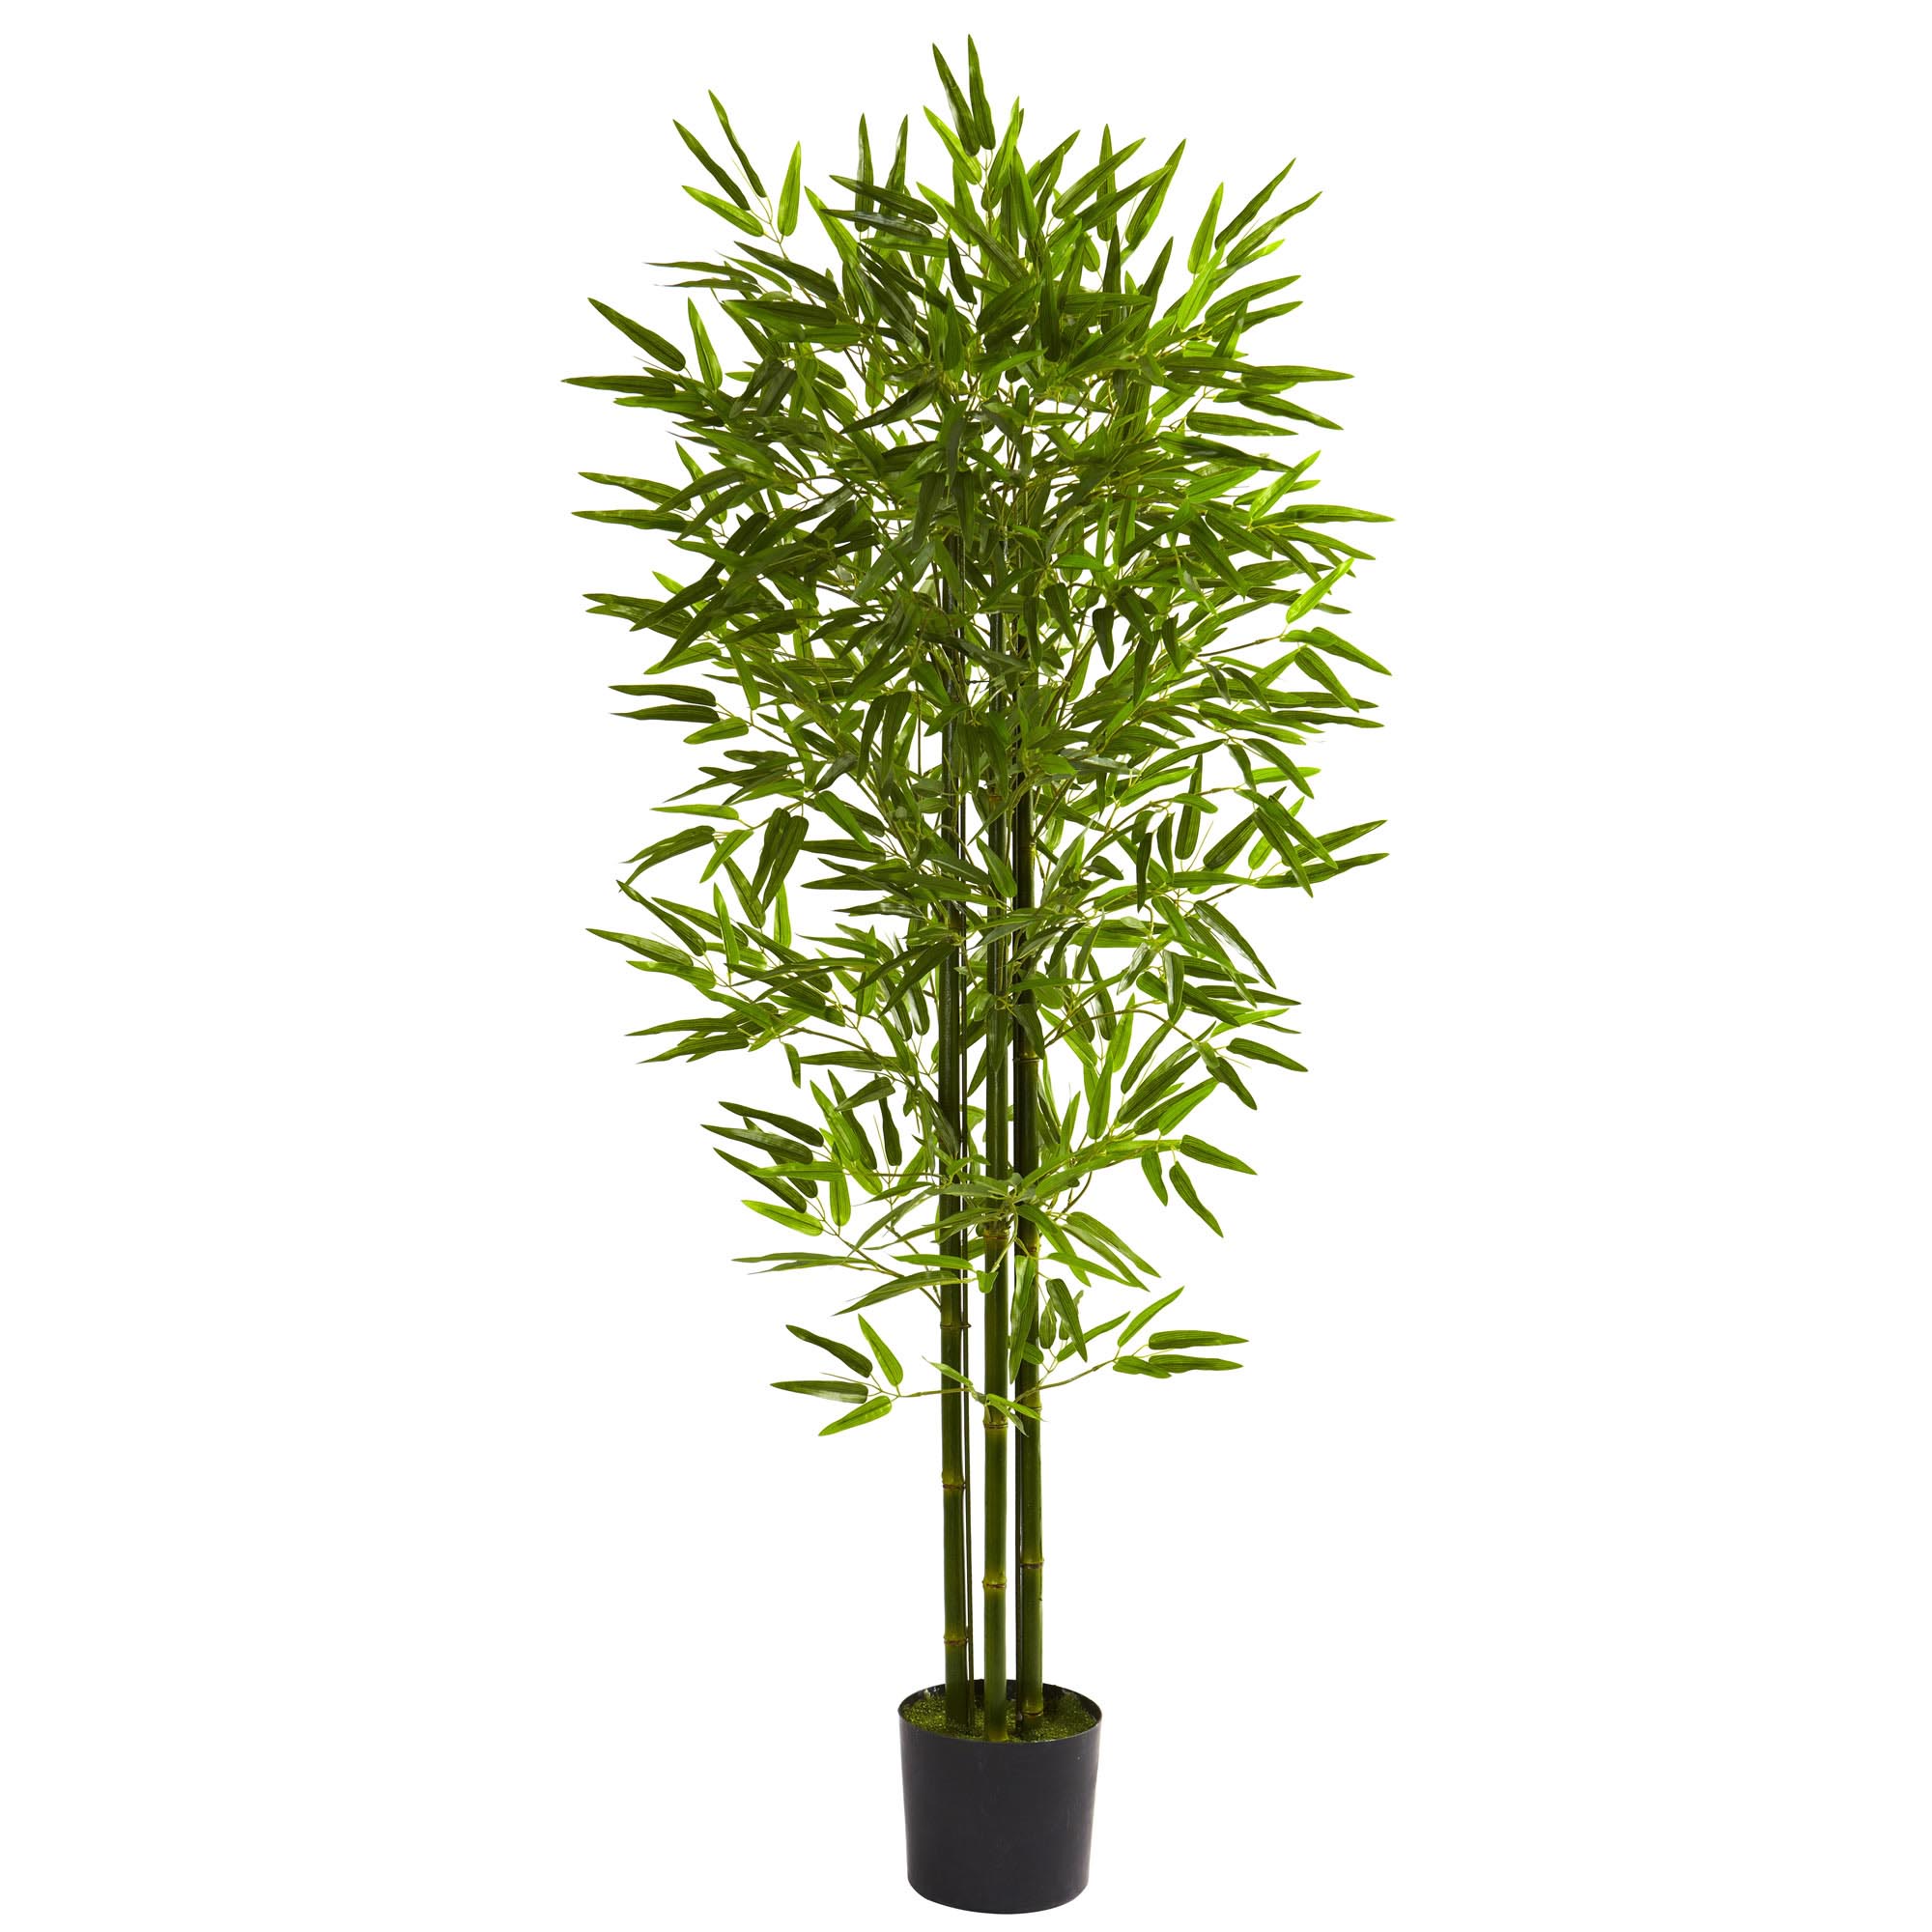 5 Foot Outdoor Artificial Bamboo Tree: Limited Uv